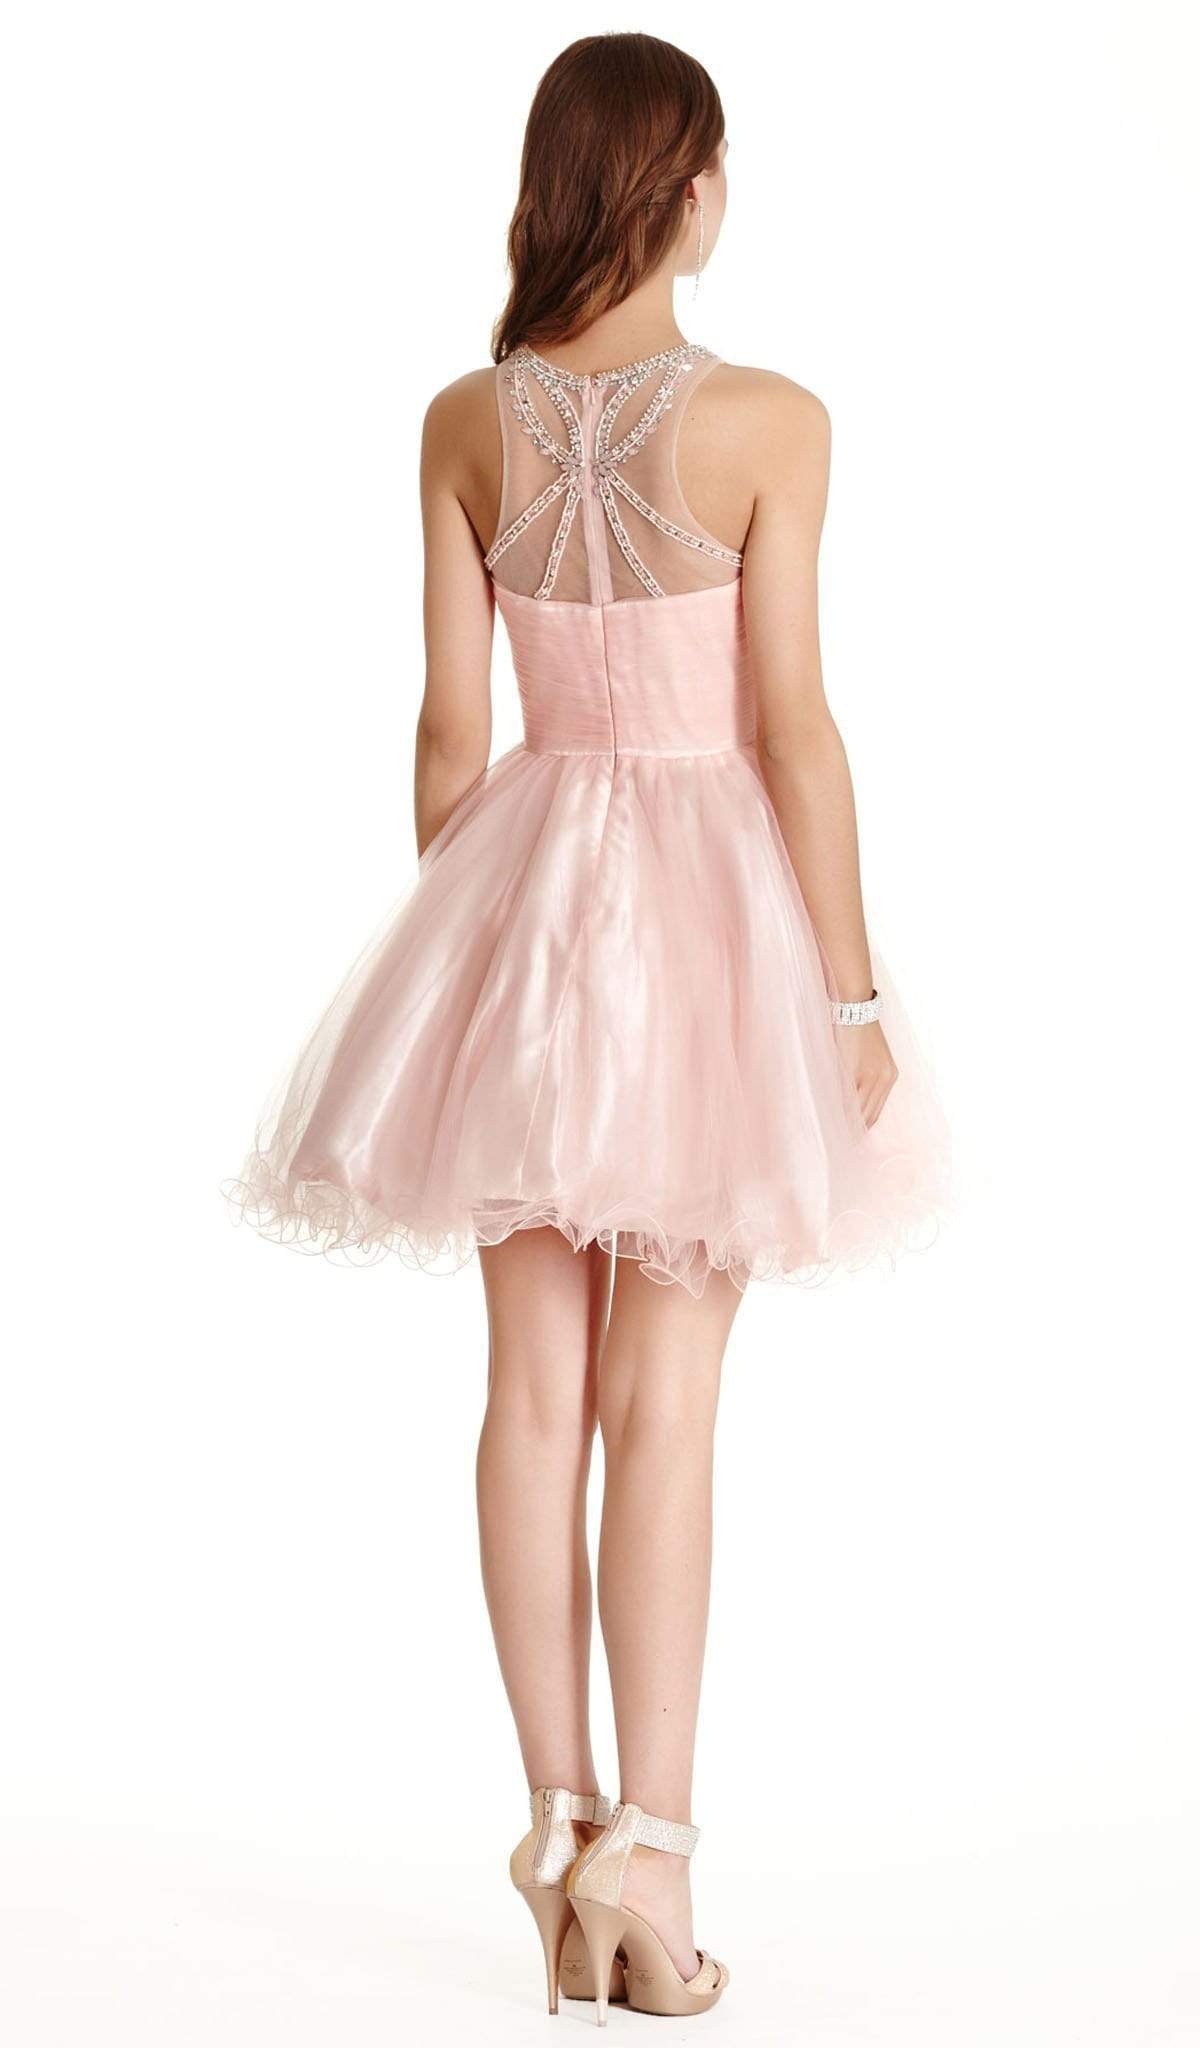 Dazzling Illusion Halter A-line Homecoming Dress Dress